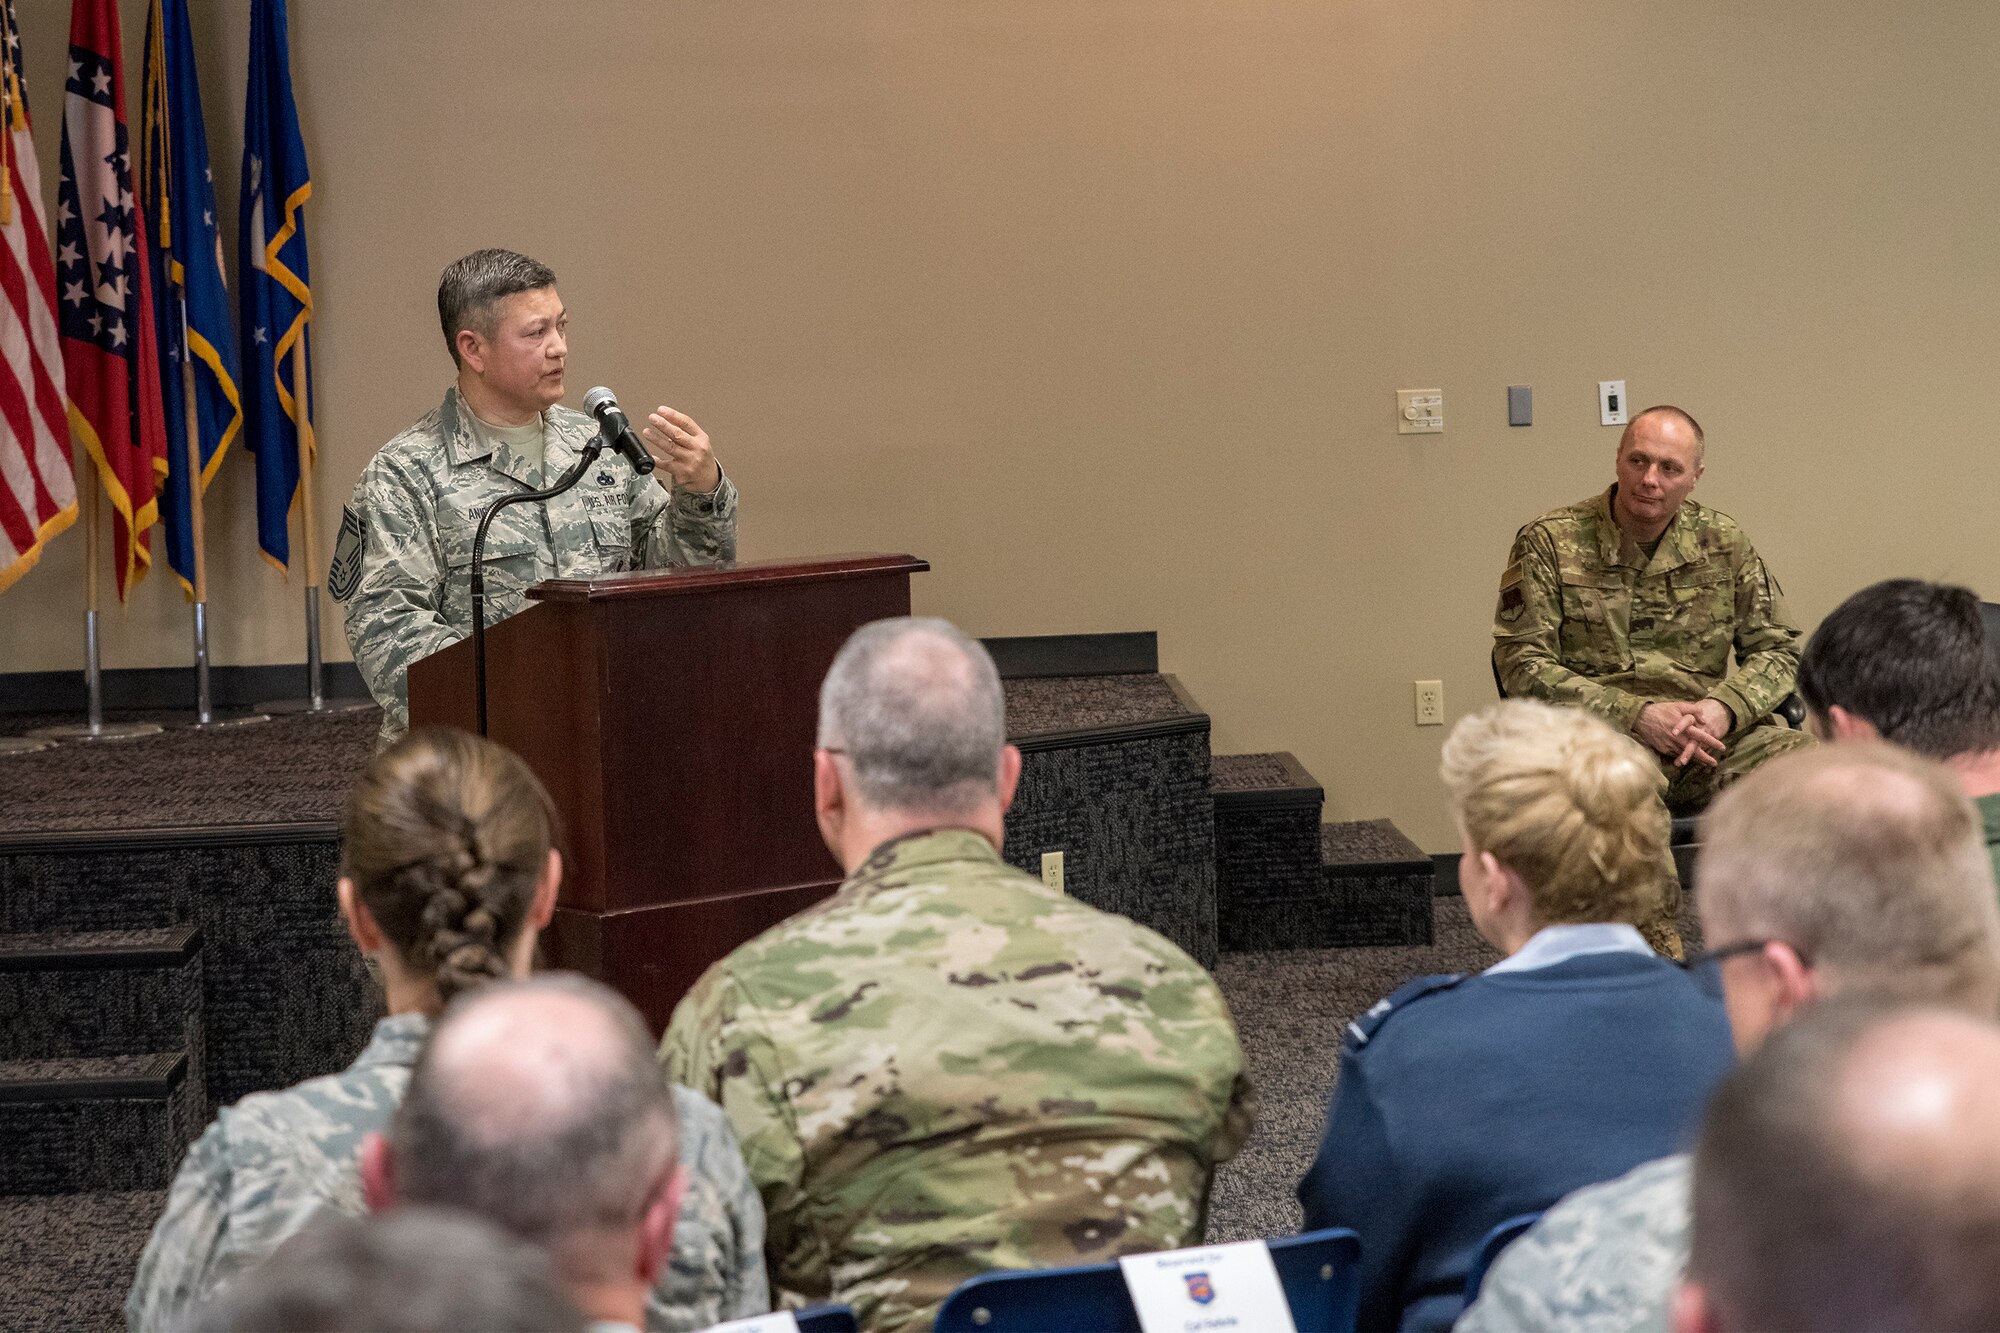 Chief Master Sgt. Brian Anible, 188th wing staff first sergeant, delivers remarks during a promotion ceremony held at Ebbing Air National Guard Base, Ark., April 7, 2019. Anible has served in the Air Force for 29 years, 26 of those with the Arkansas Air National Guard. (U.S. Air National Guard photo by Tech. Sgt. John E. Hillier)